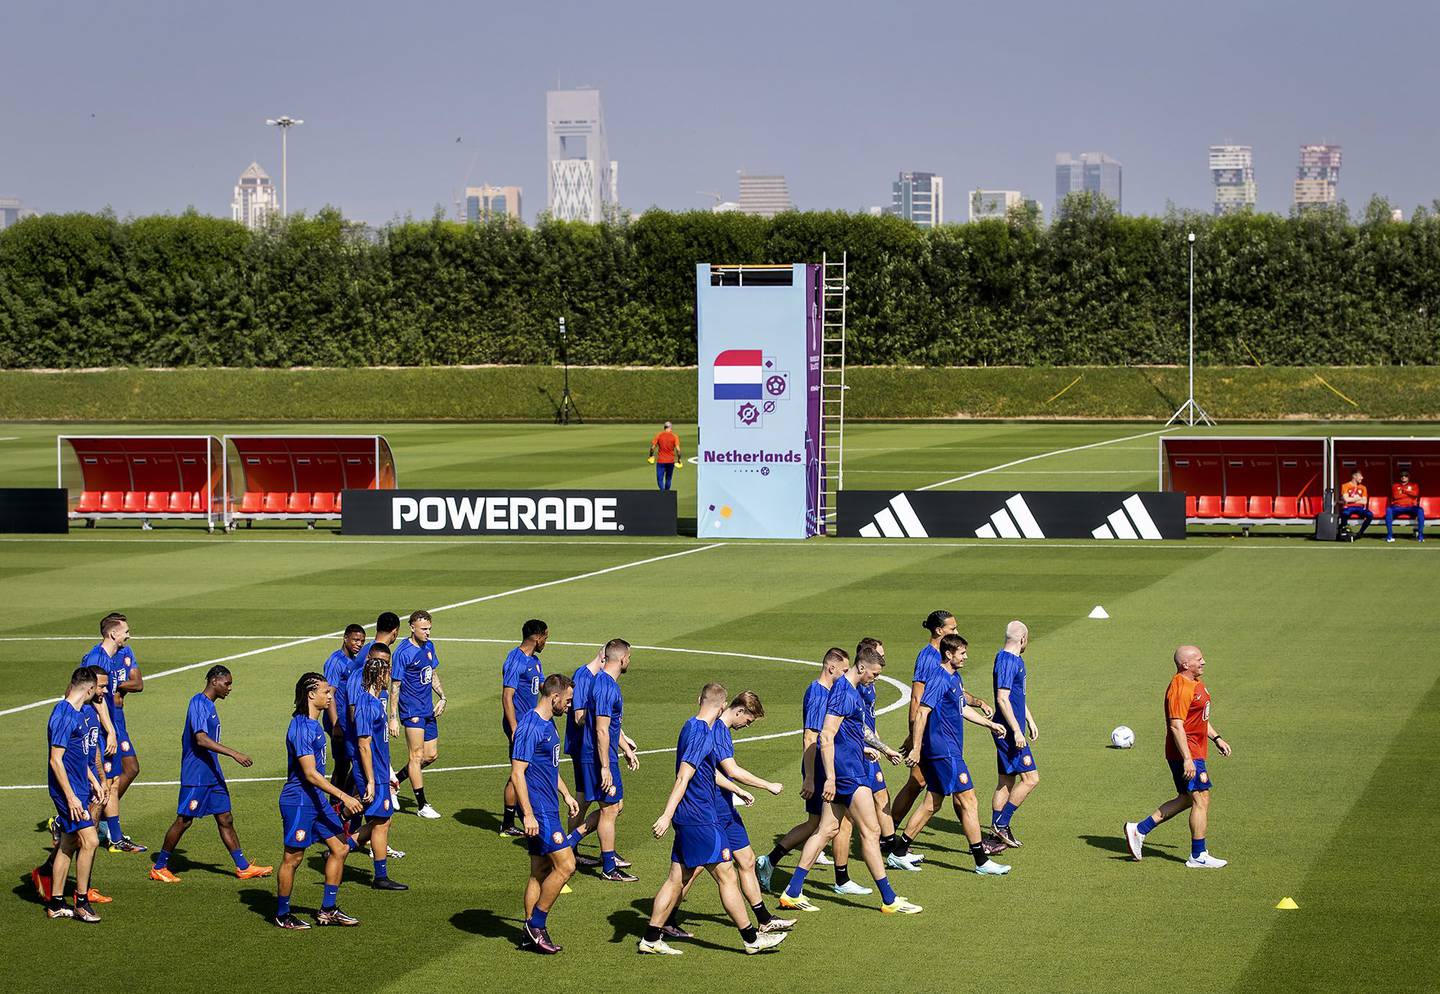 Hoardings for commercial partners surround a practice session of the Dutch national team at the Qatar University training complex in Doha, Qatar.